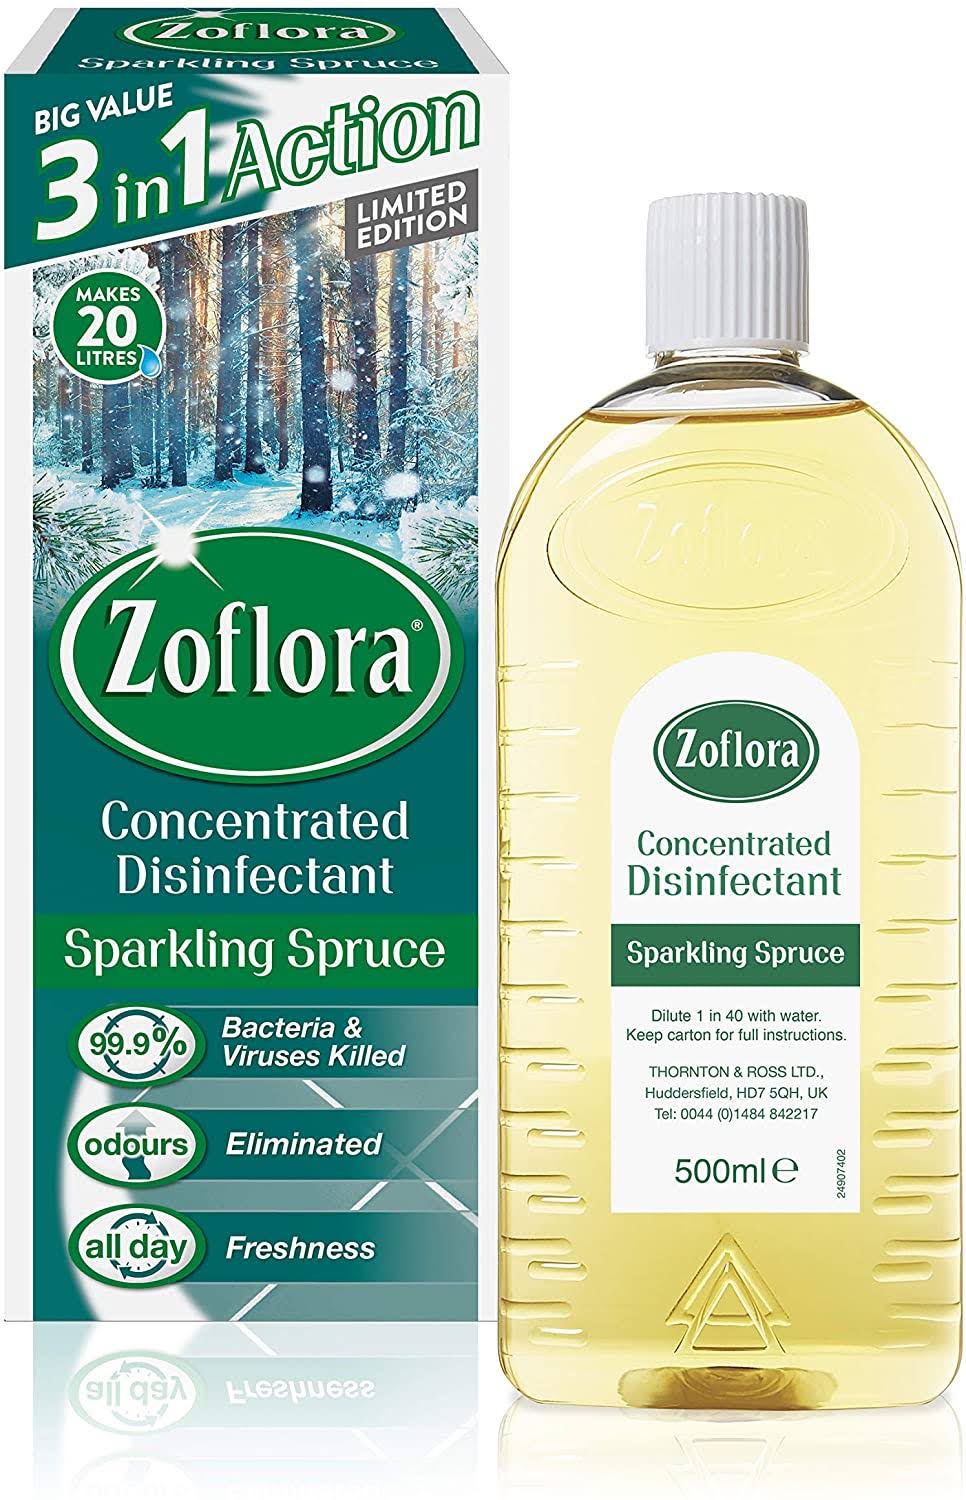 Zoflora Sparkling Spruce 500ml, Concentrated Disinfectant, All Purpose Cleaner, Kills 99.9% of Bacteria and Viruses